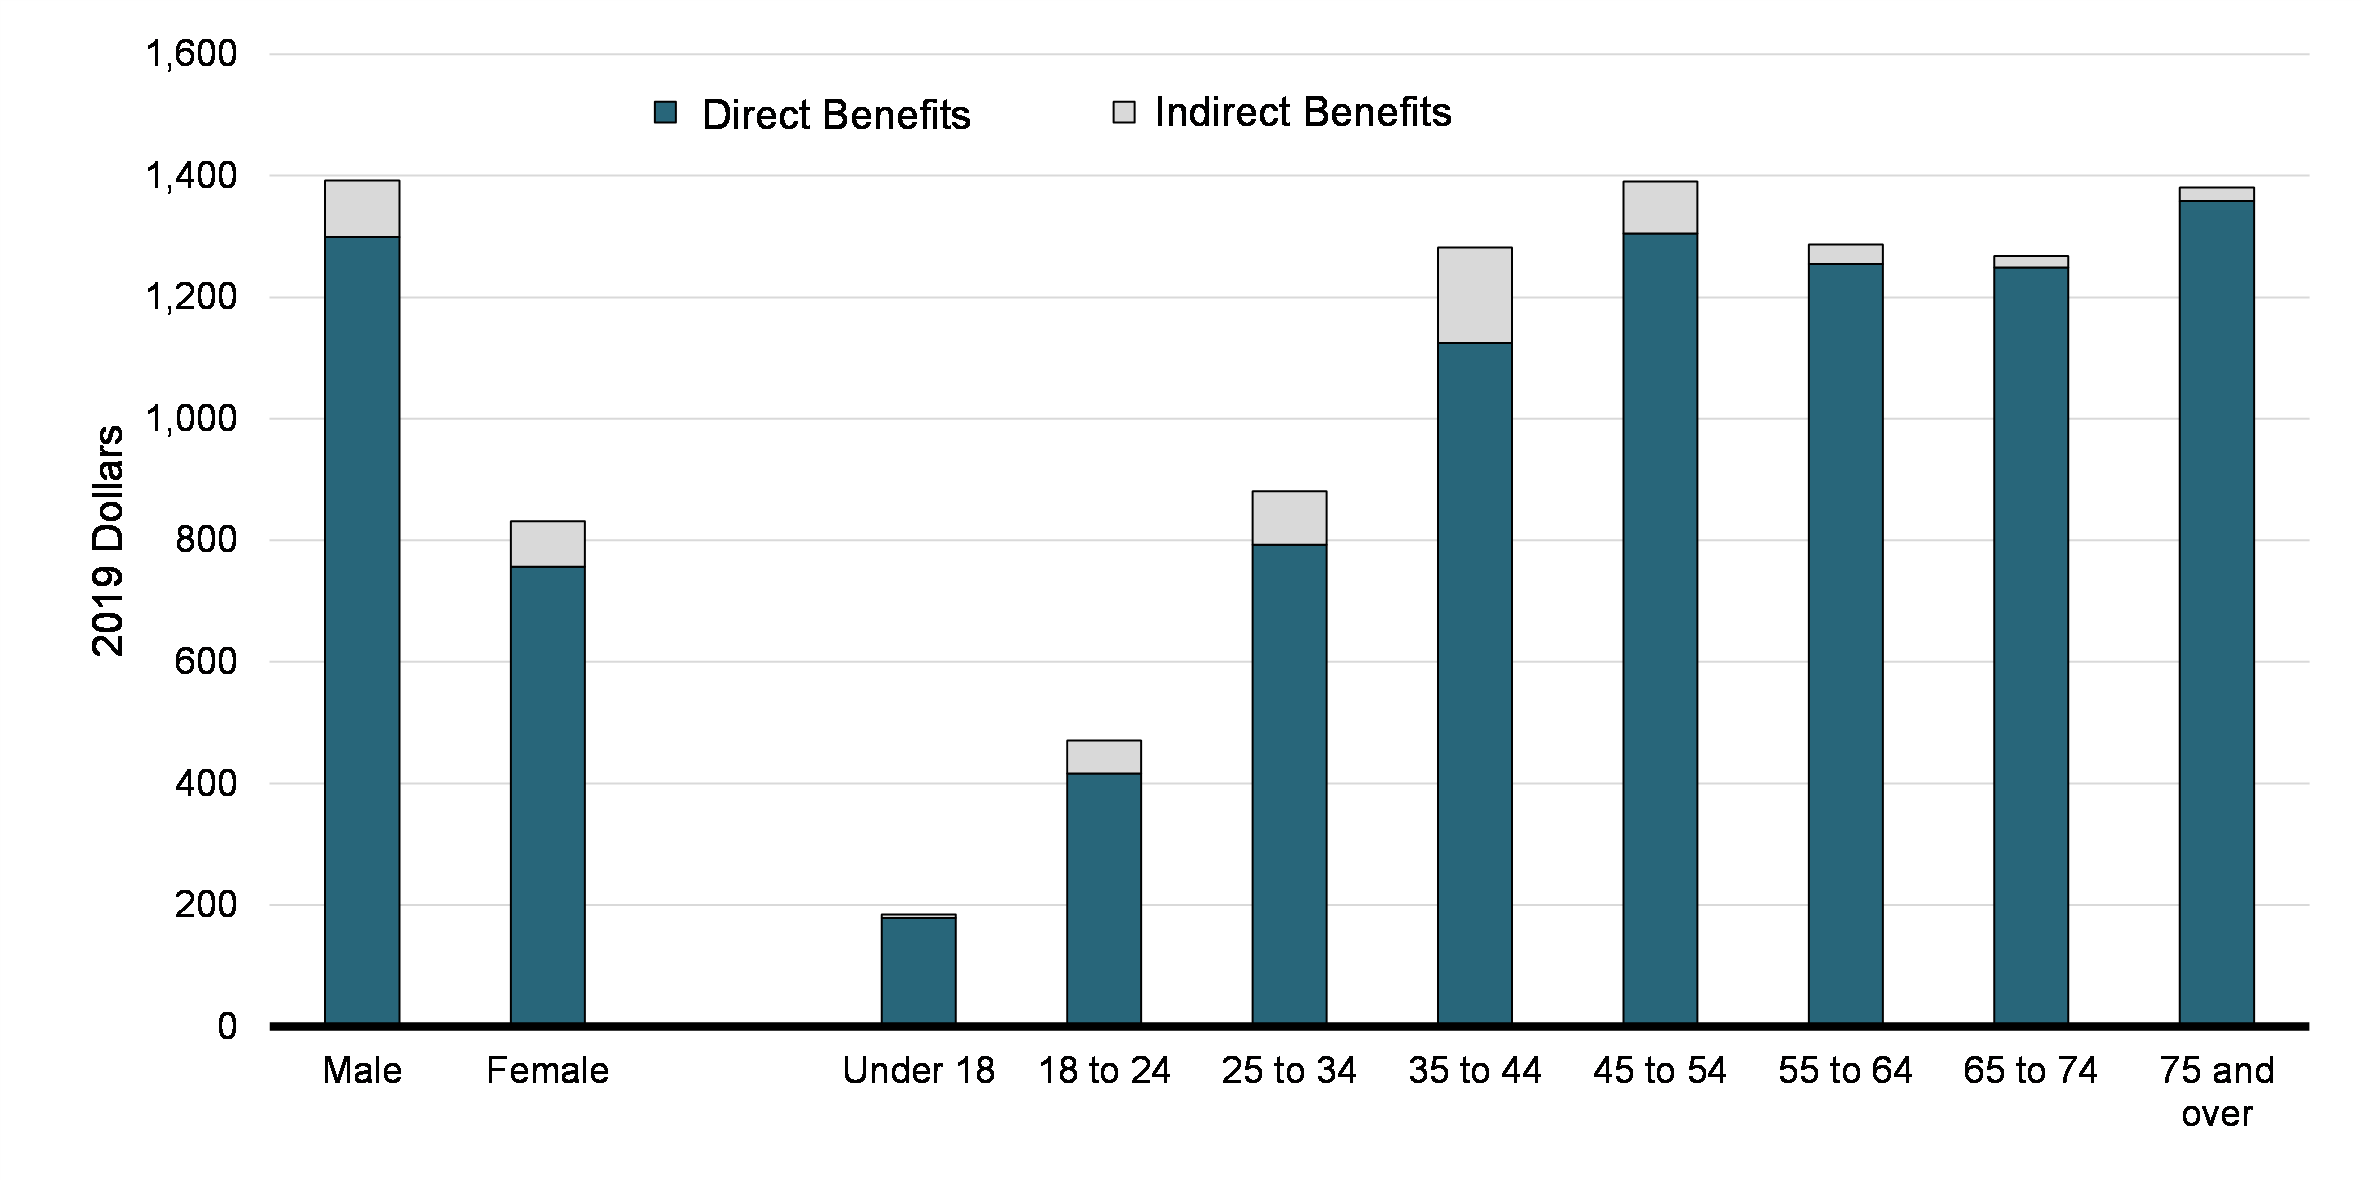  Chart 37: Direct and Indirect Benefits of OEE Deductions, by Gender and Age Group (2018), in 2019 Dollars
